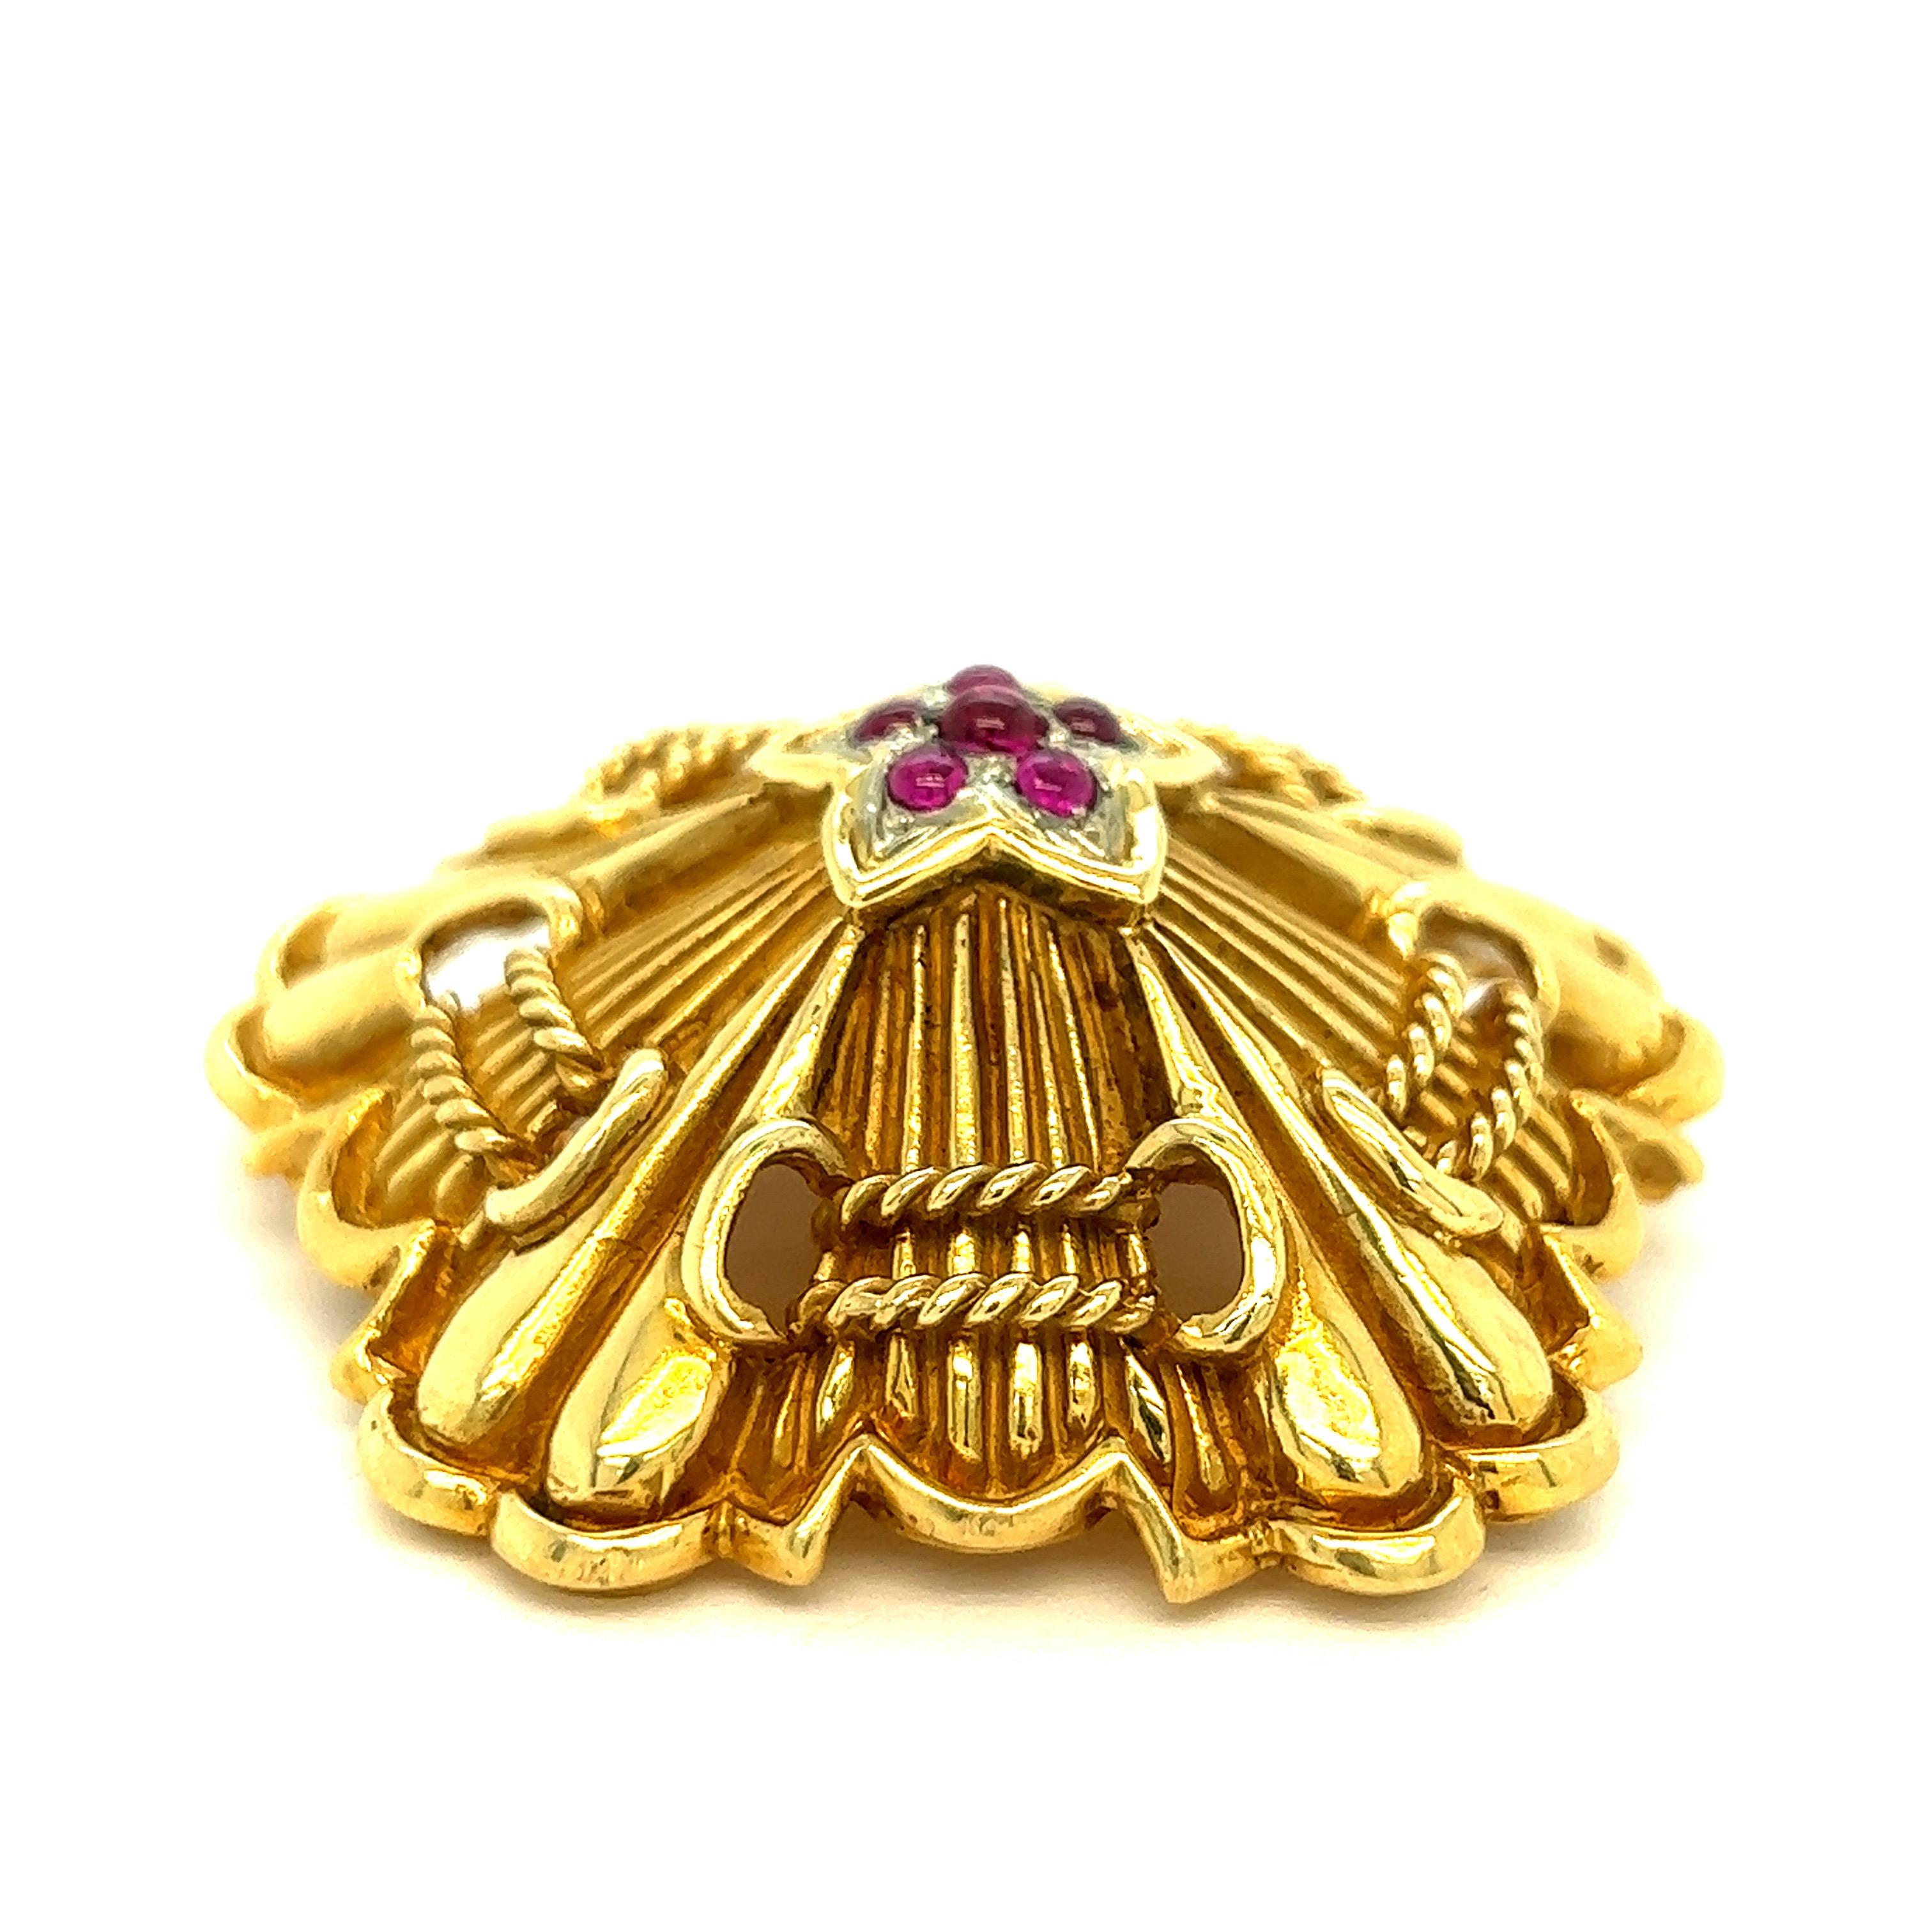 Tiffany & Co. Ruby 18k Gold Brooch In Excellent Condition For Sale In New York, NY